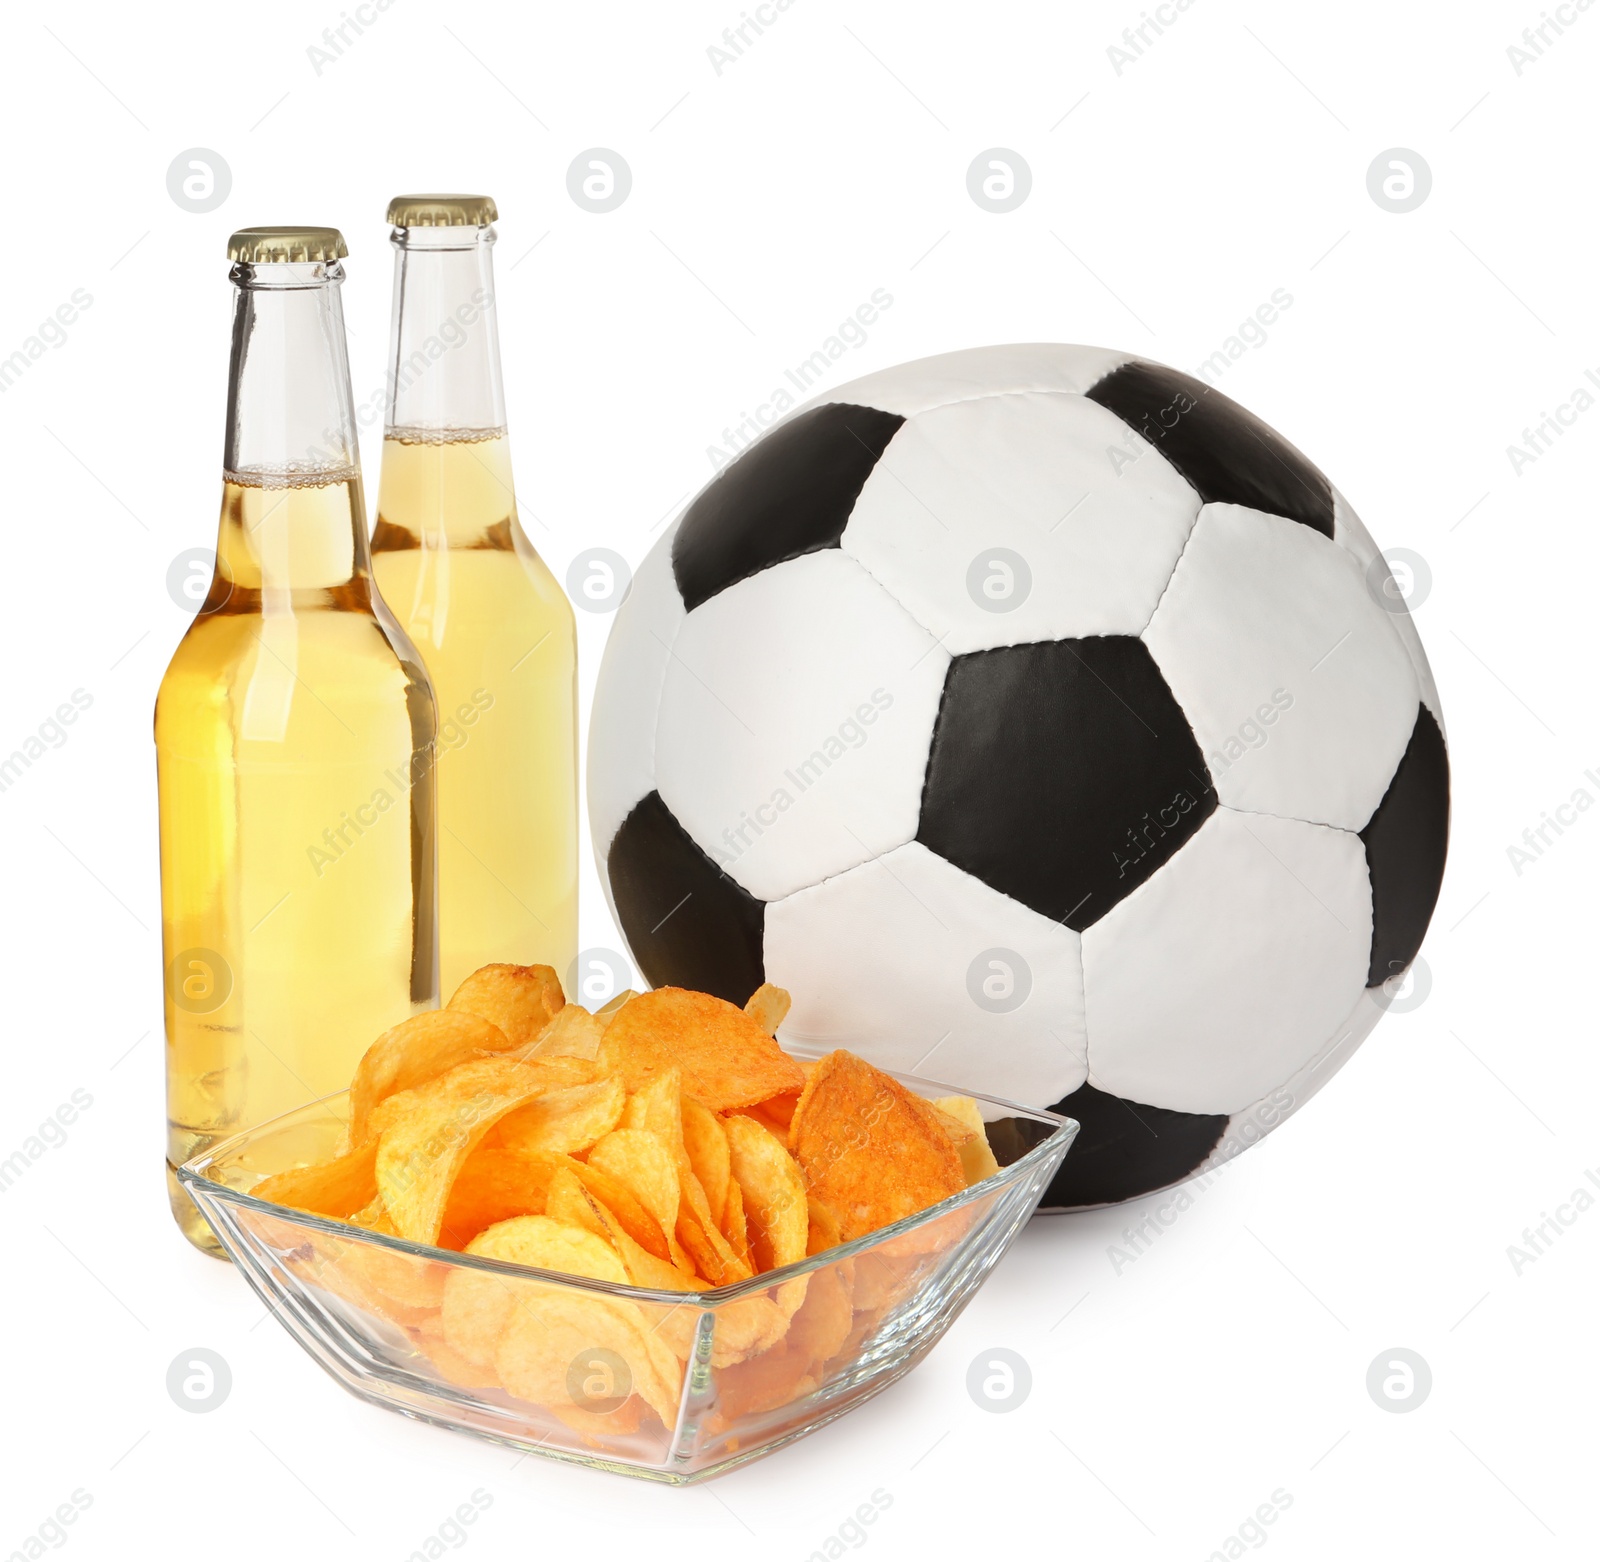 Photo of Soccer ball, beer and chips on white background